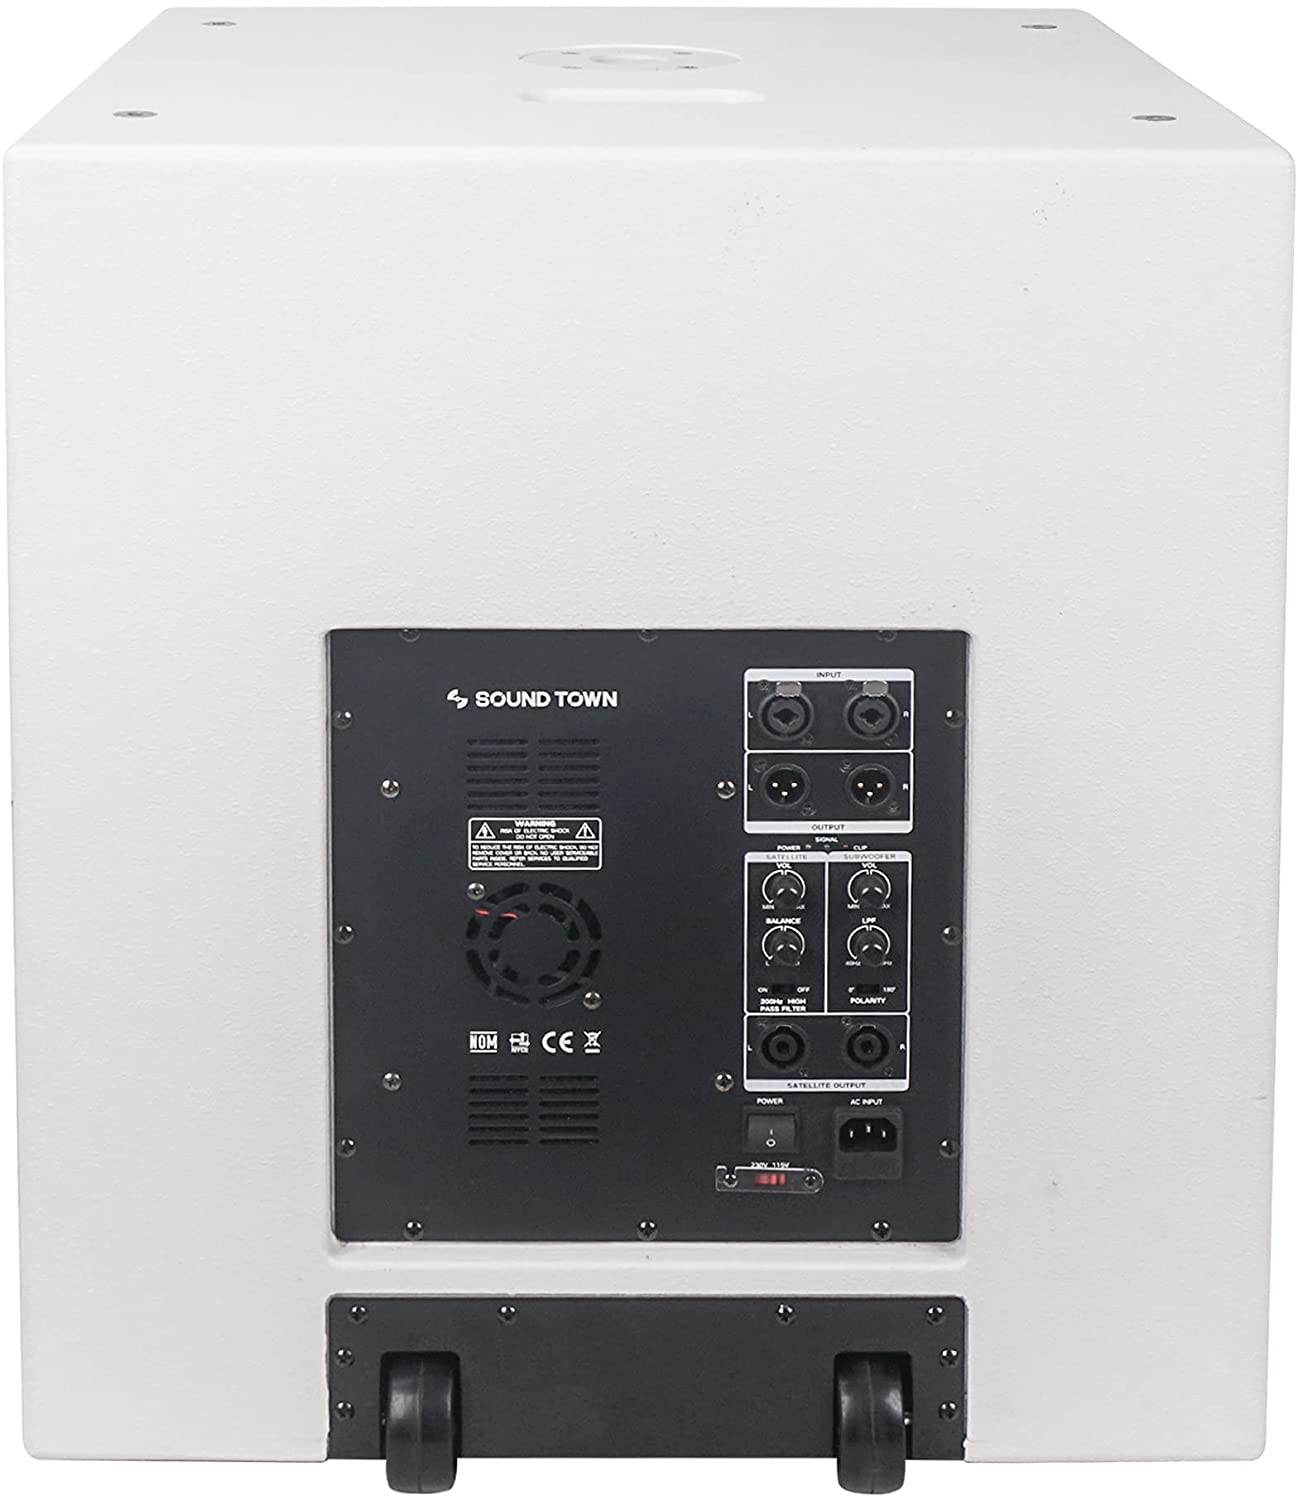 Sound Town 2000W 18" Active Powered Subwoofer with 2 Speaker Outputs, DJ/PA Pro Audio Sub with 4" Voice Coil, White (CARPO-18SWPW) - image 5 of 7